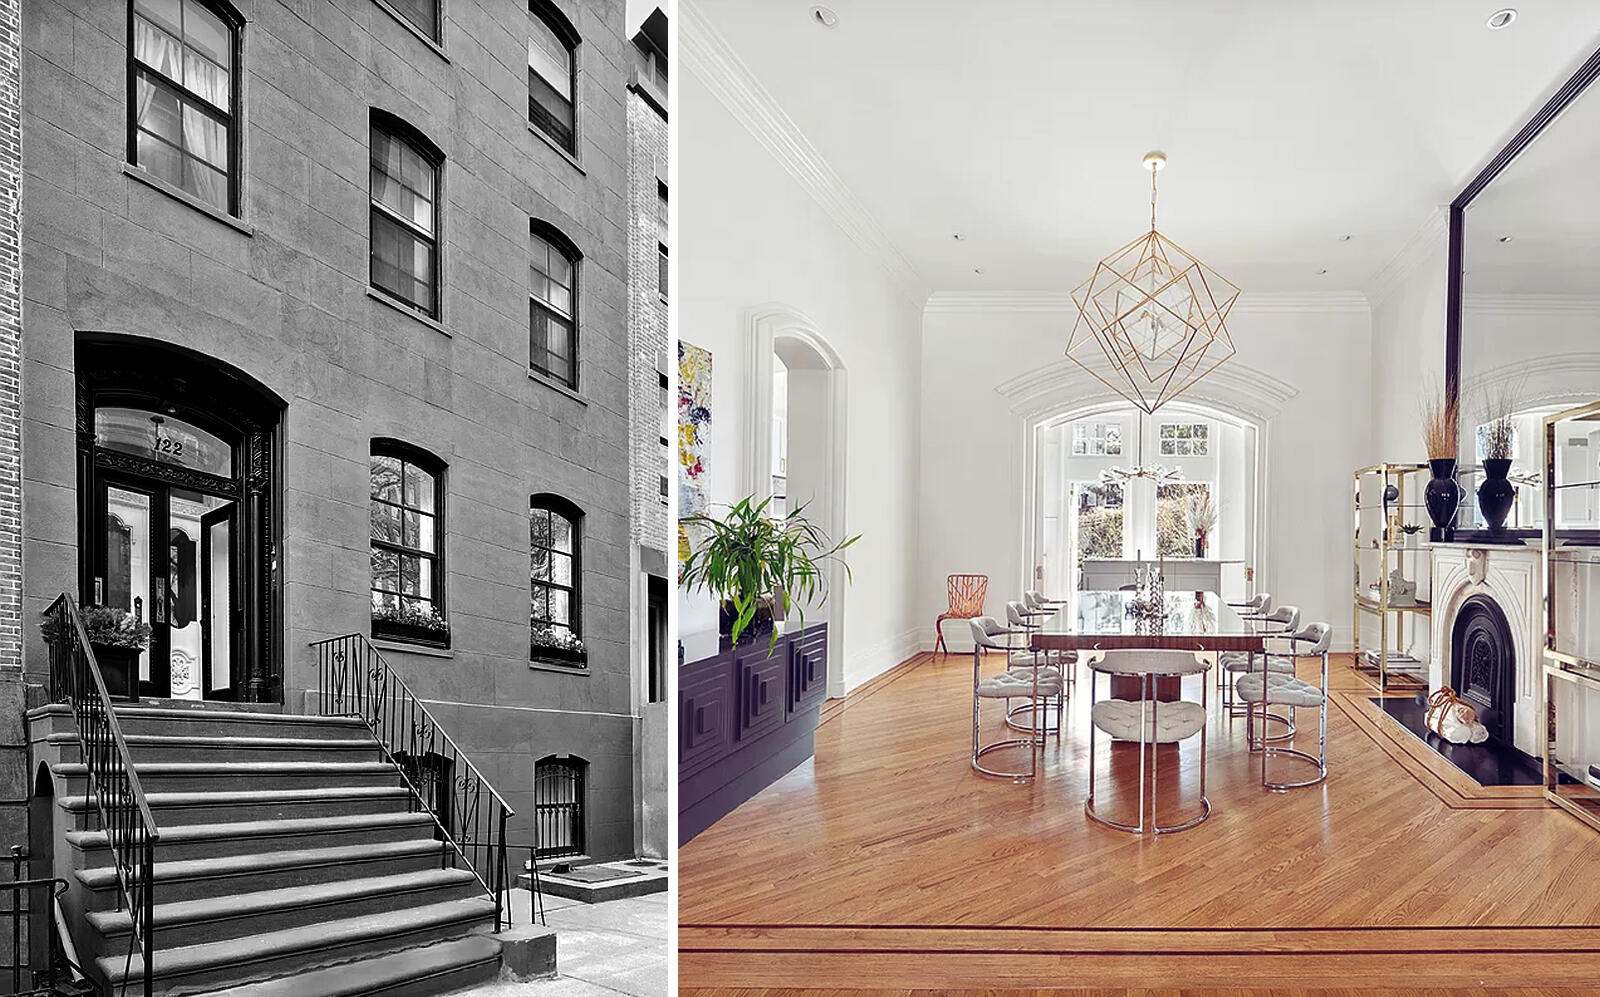 122 Amity Street signed for over $4 million. (Compass)